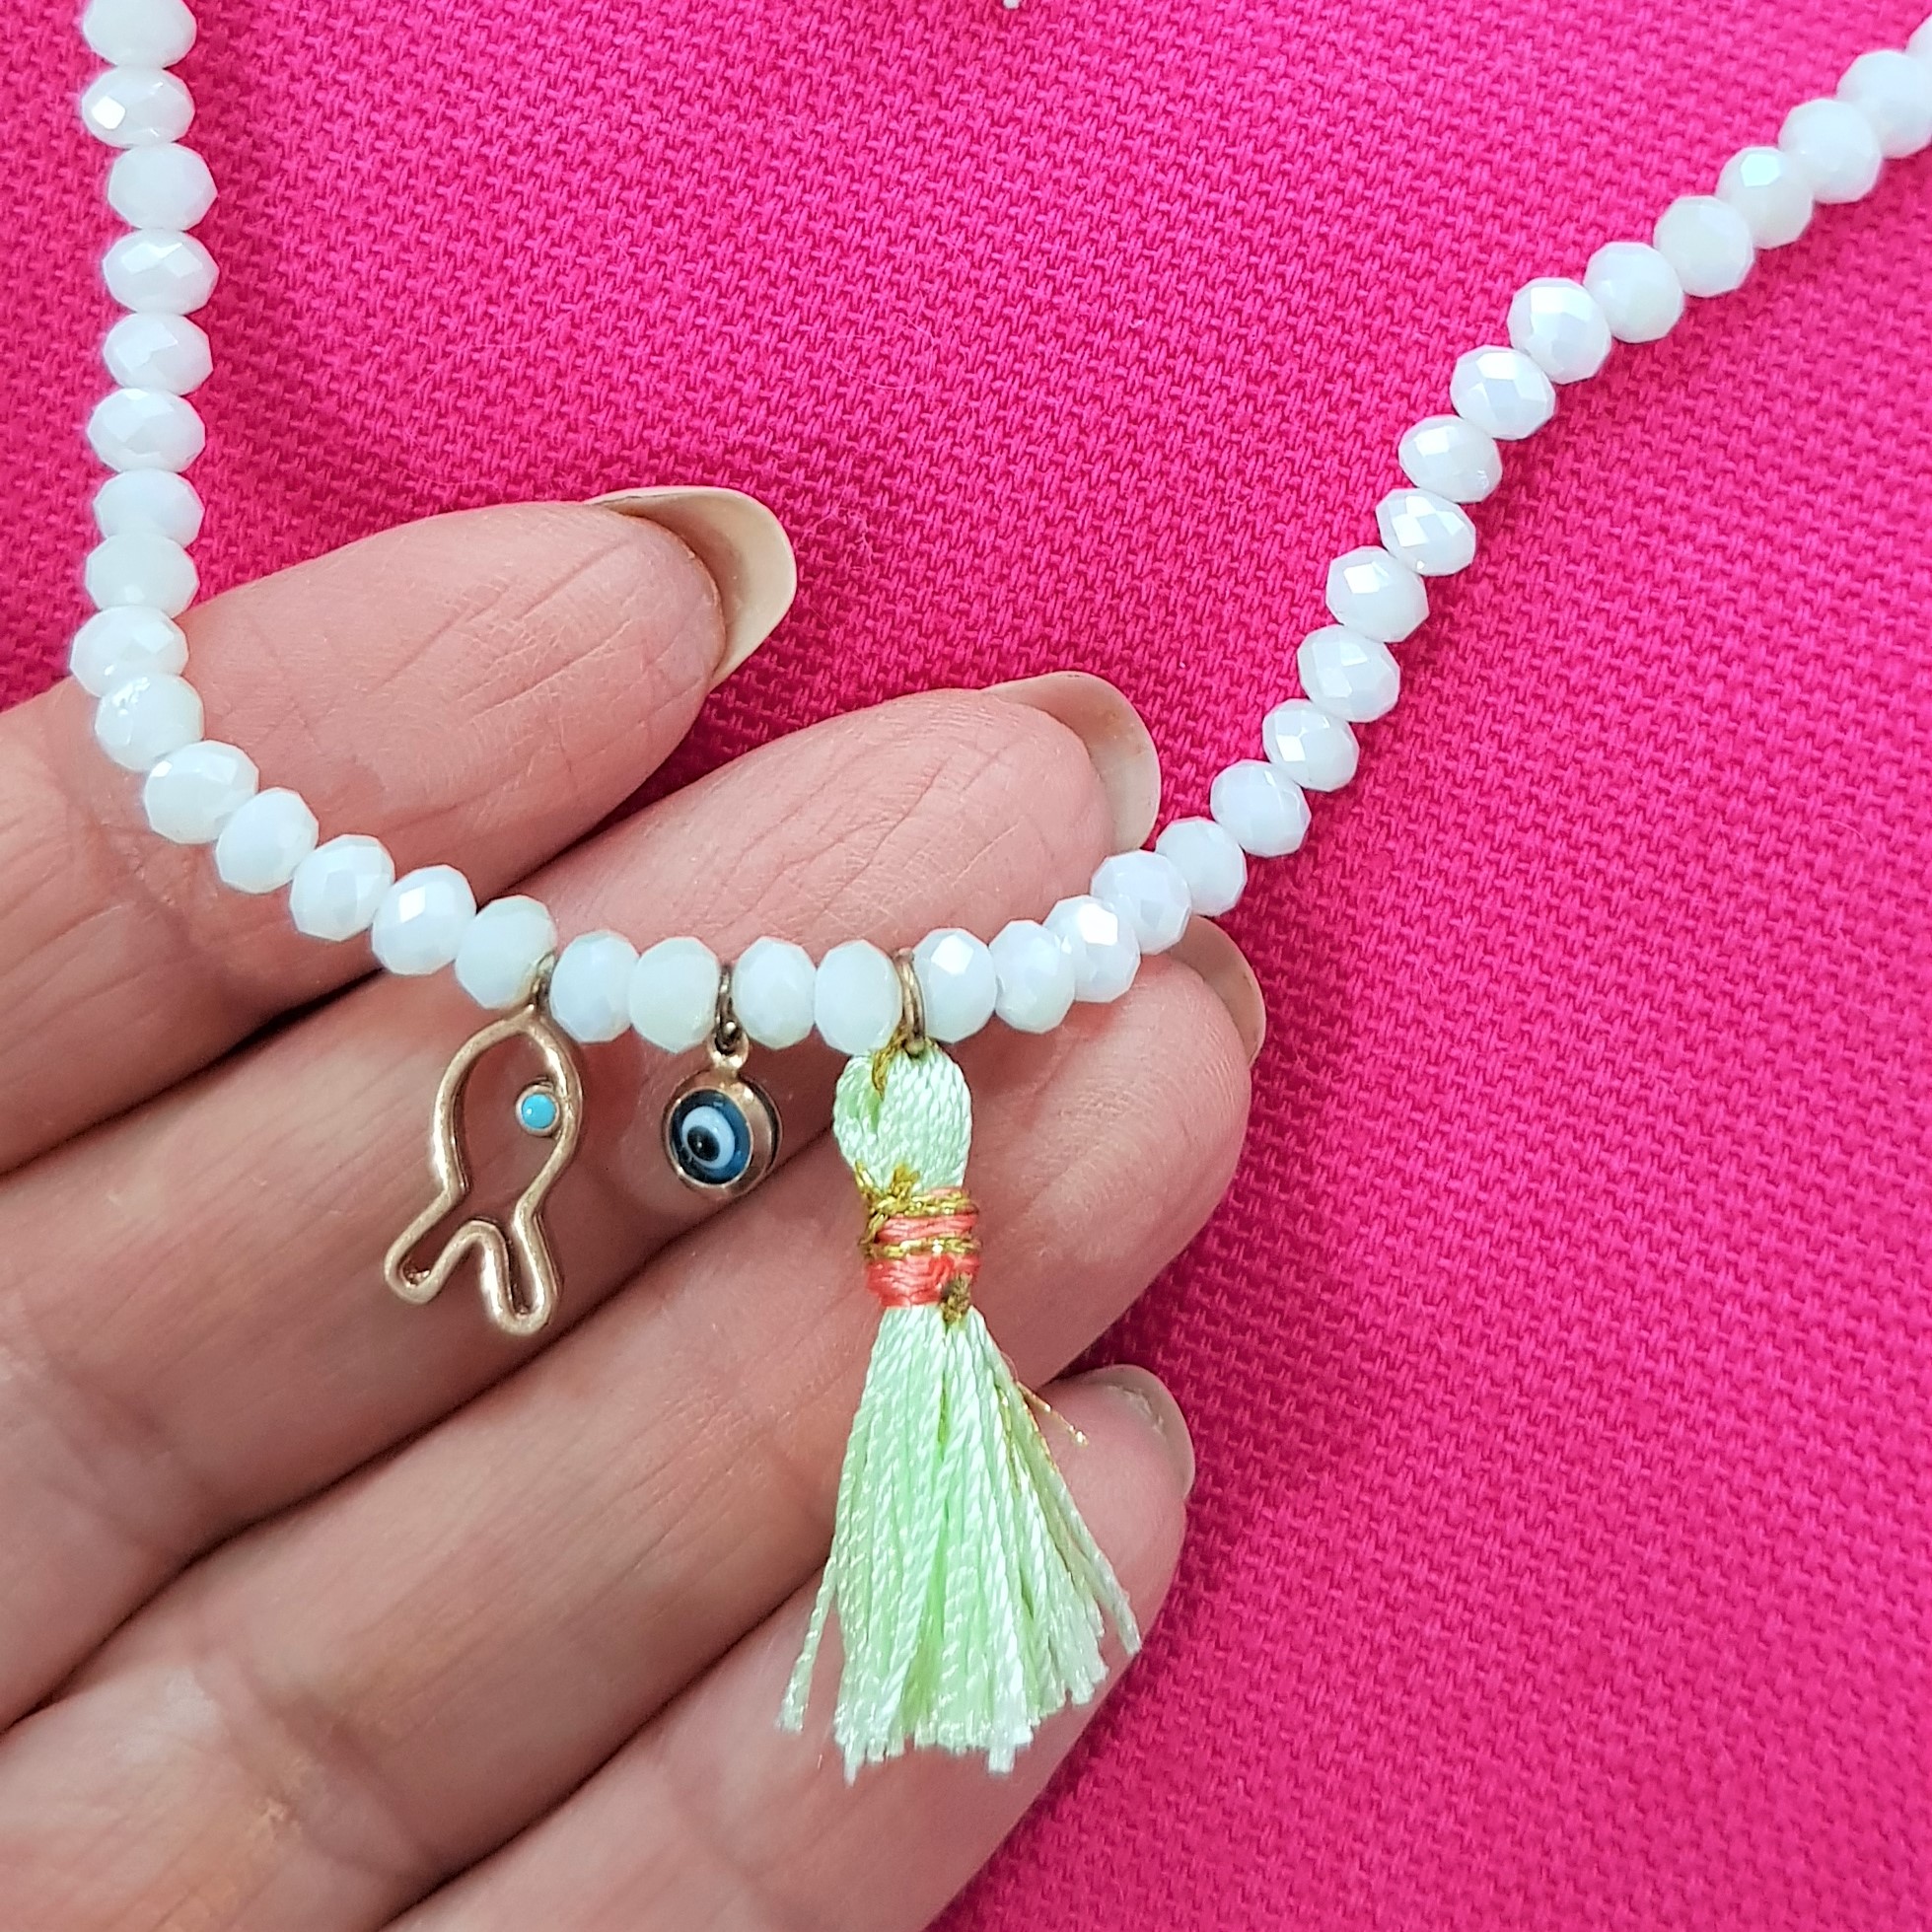 close up white bead necklace